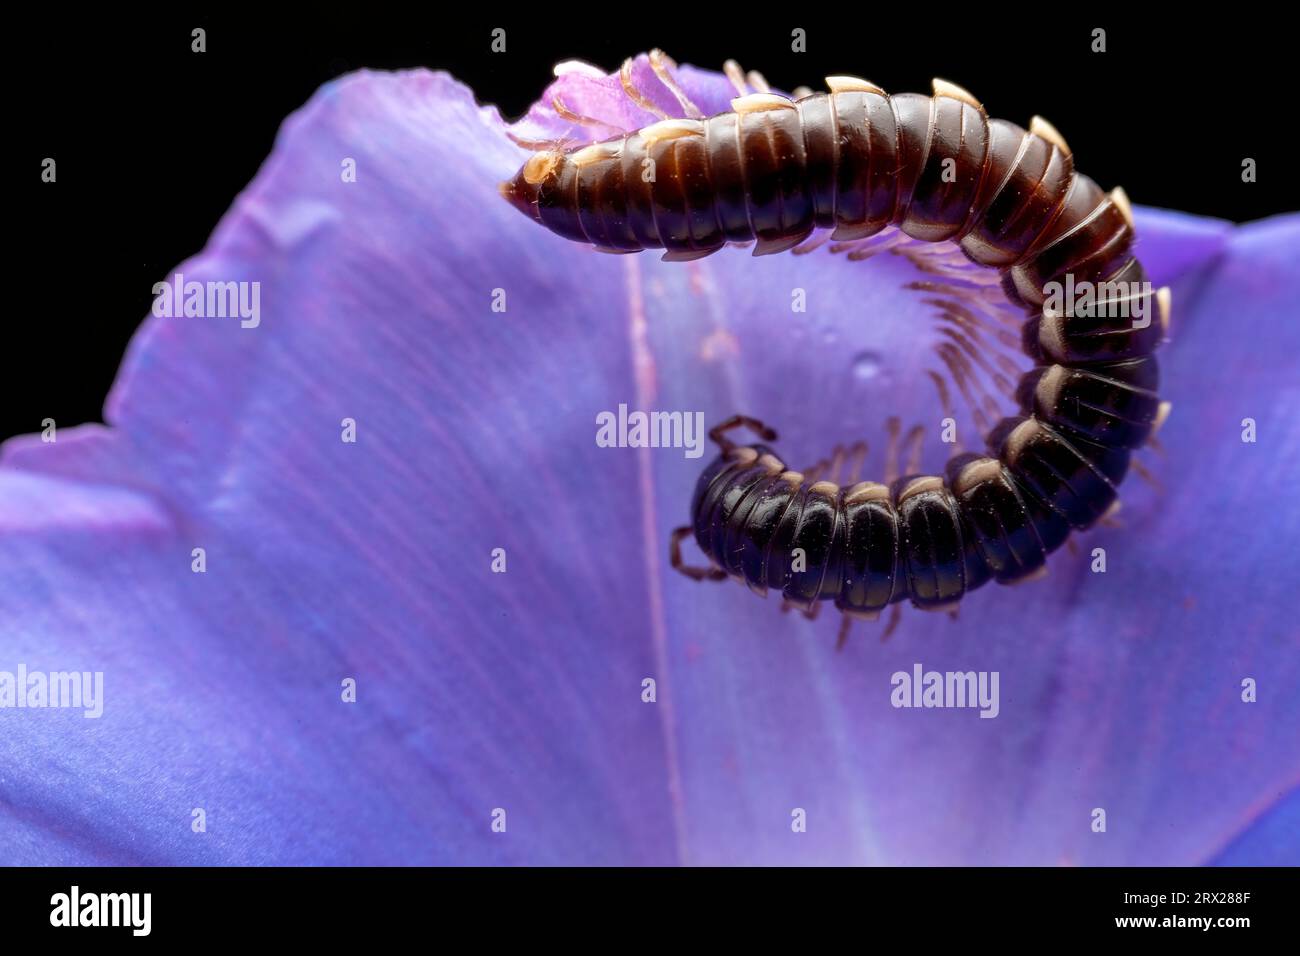 millipede in the wild state Stock Photo